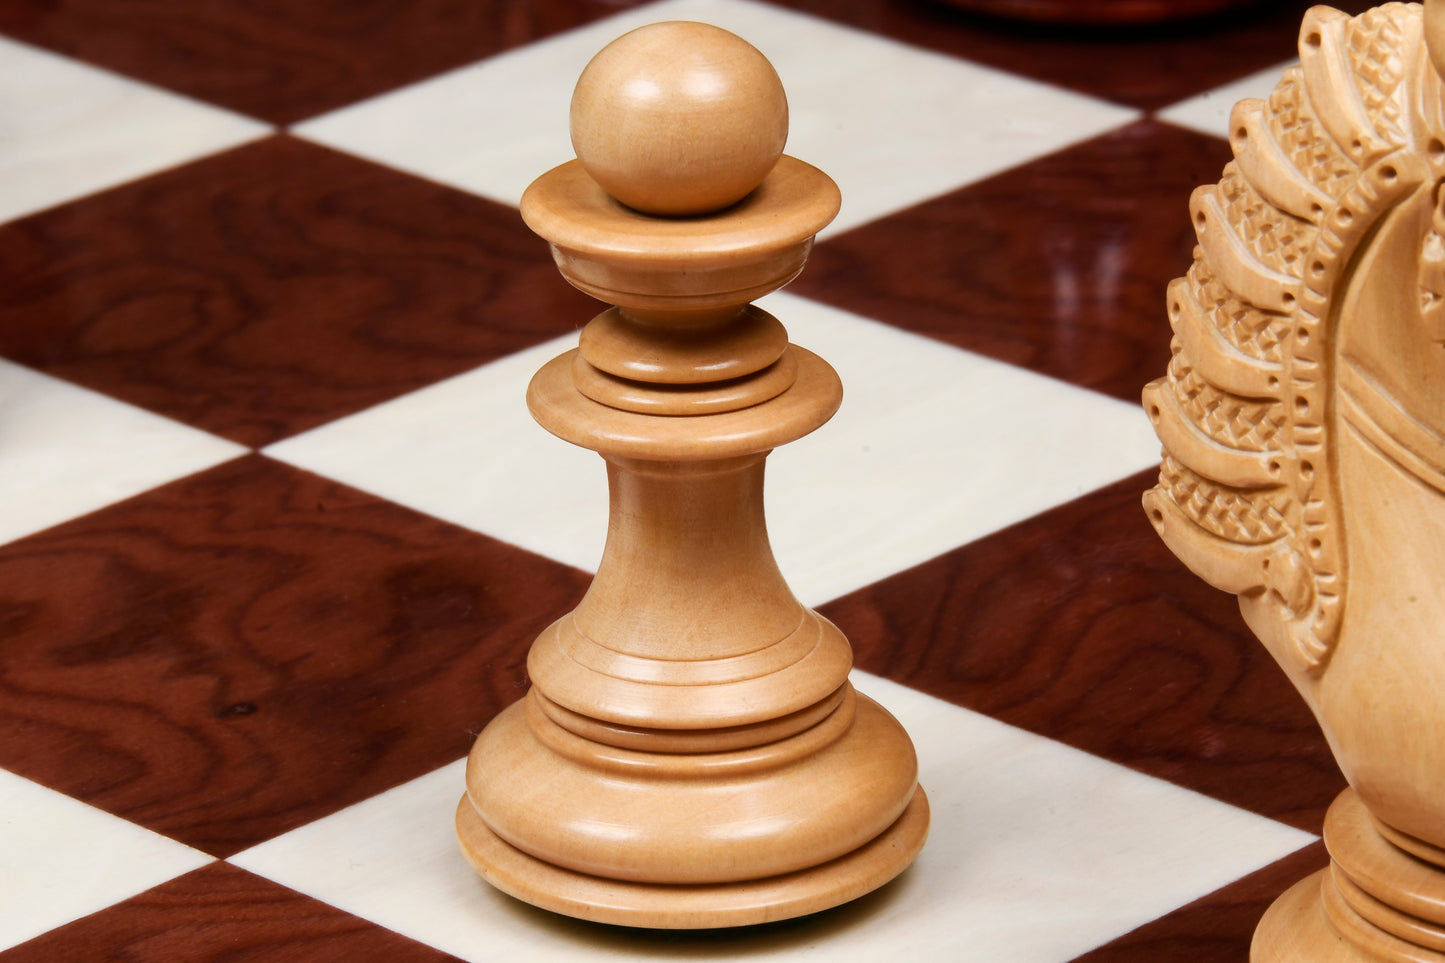 The Sikh Empire Series Triple Weighted Wooden Handmade Chess Pieces in Bud Rosewood (Padauk) and Indian Boxwood - 4.5" King